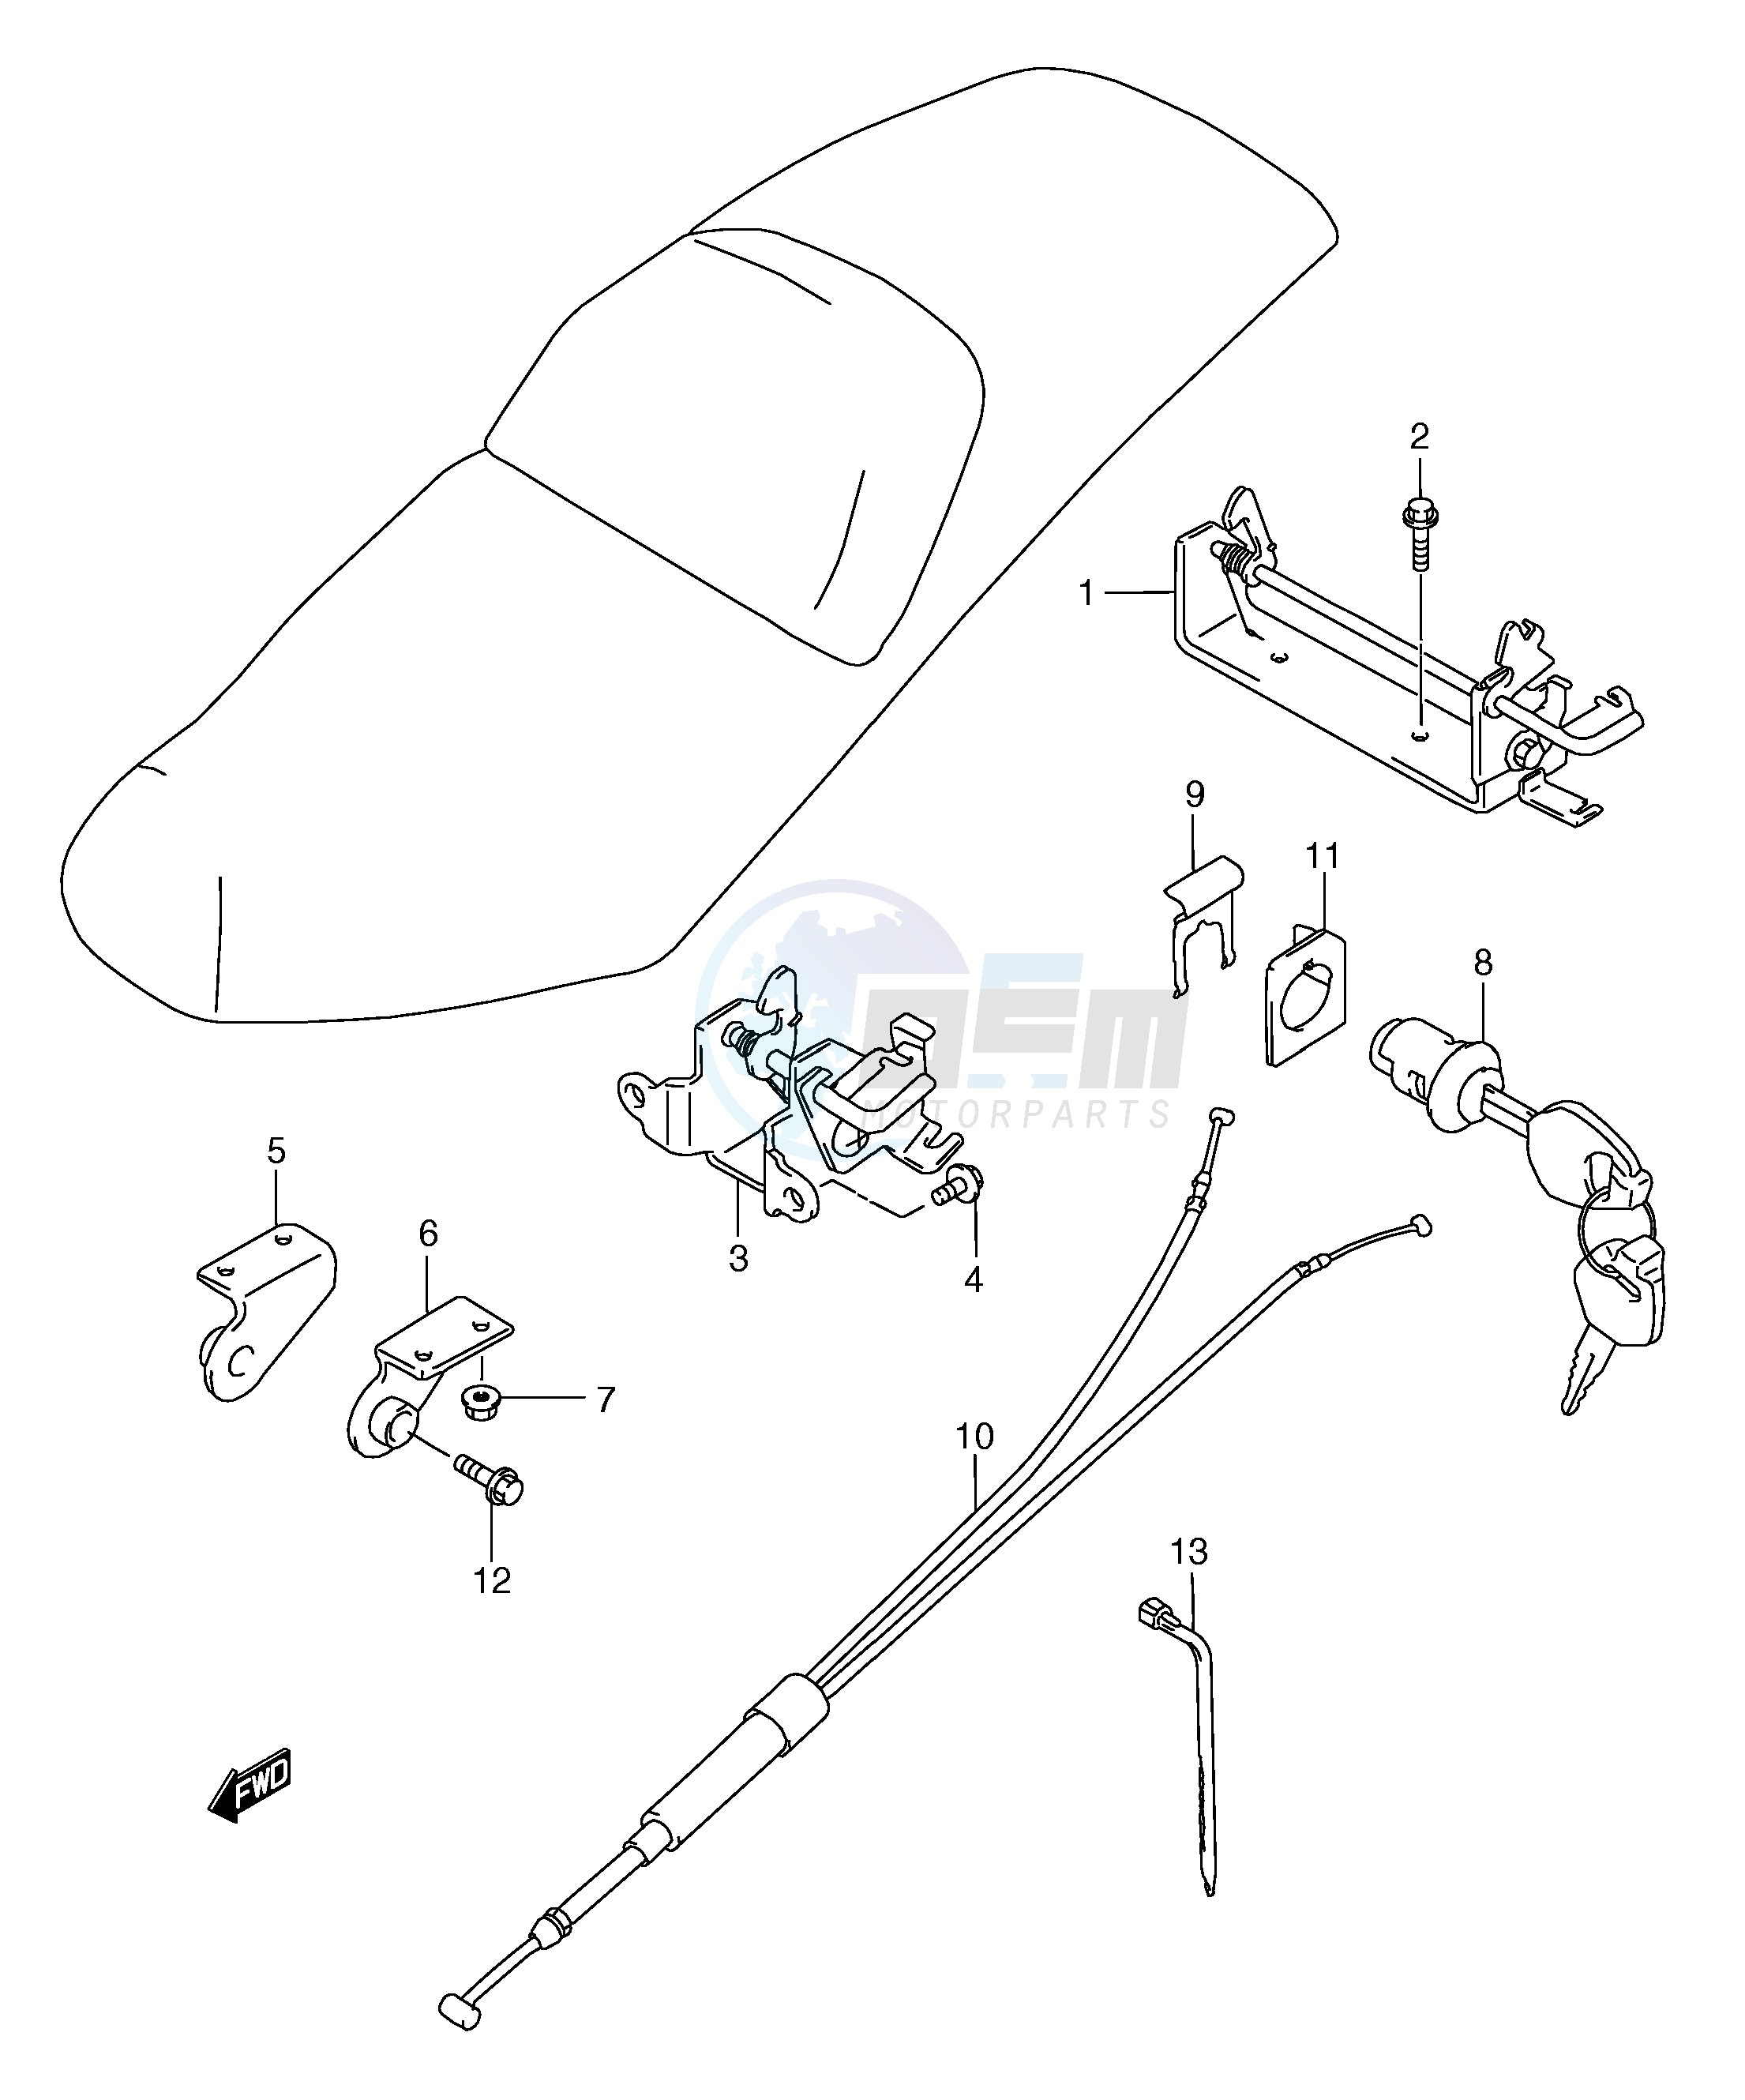 SEAT SUPPORT BRACKET (SEE NOTE) blueprint